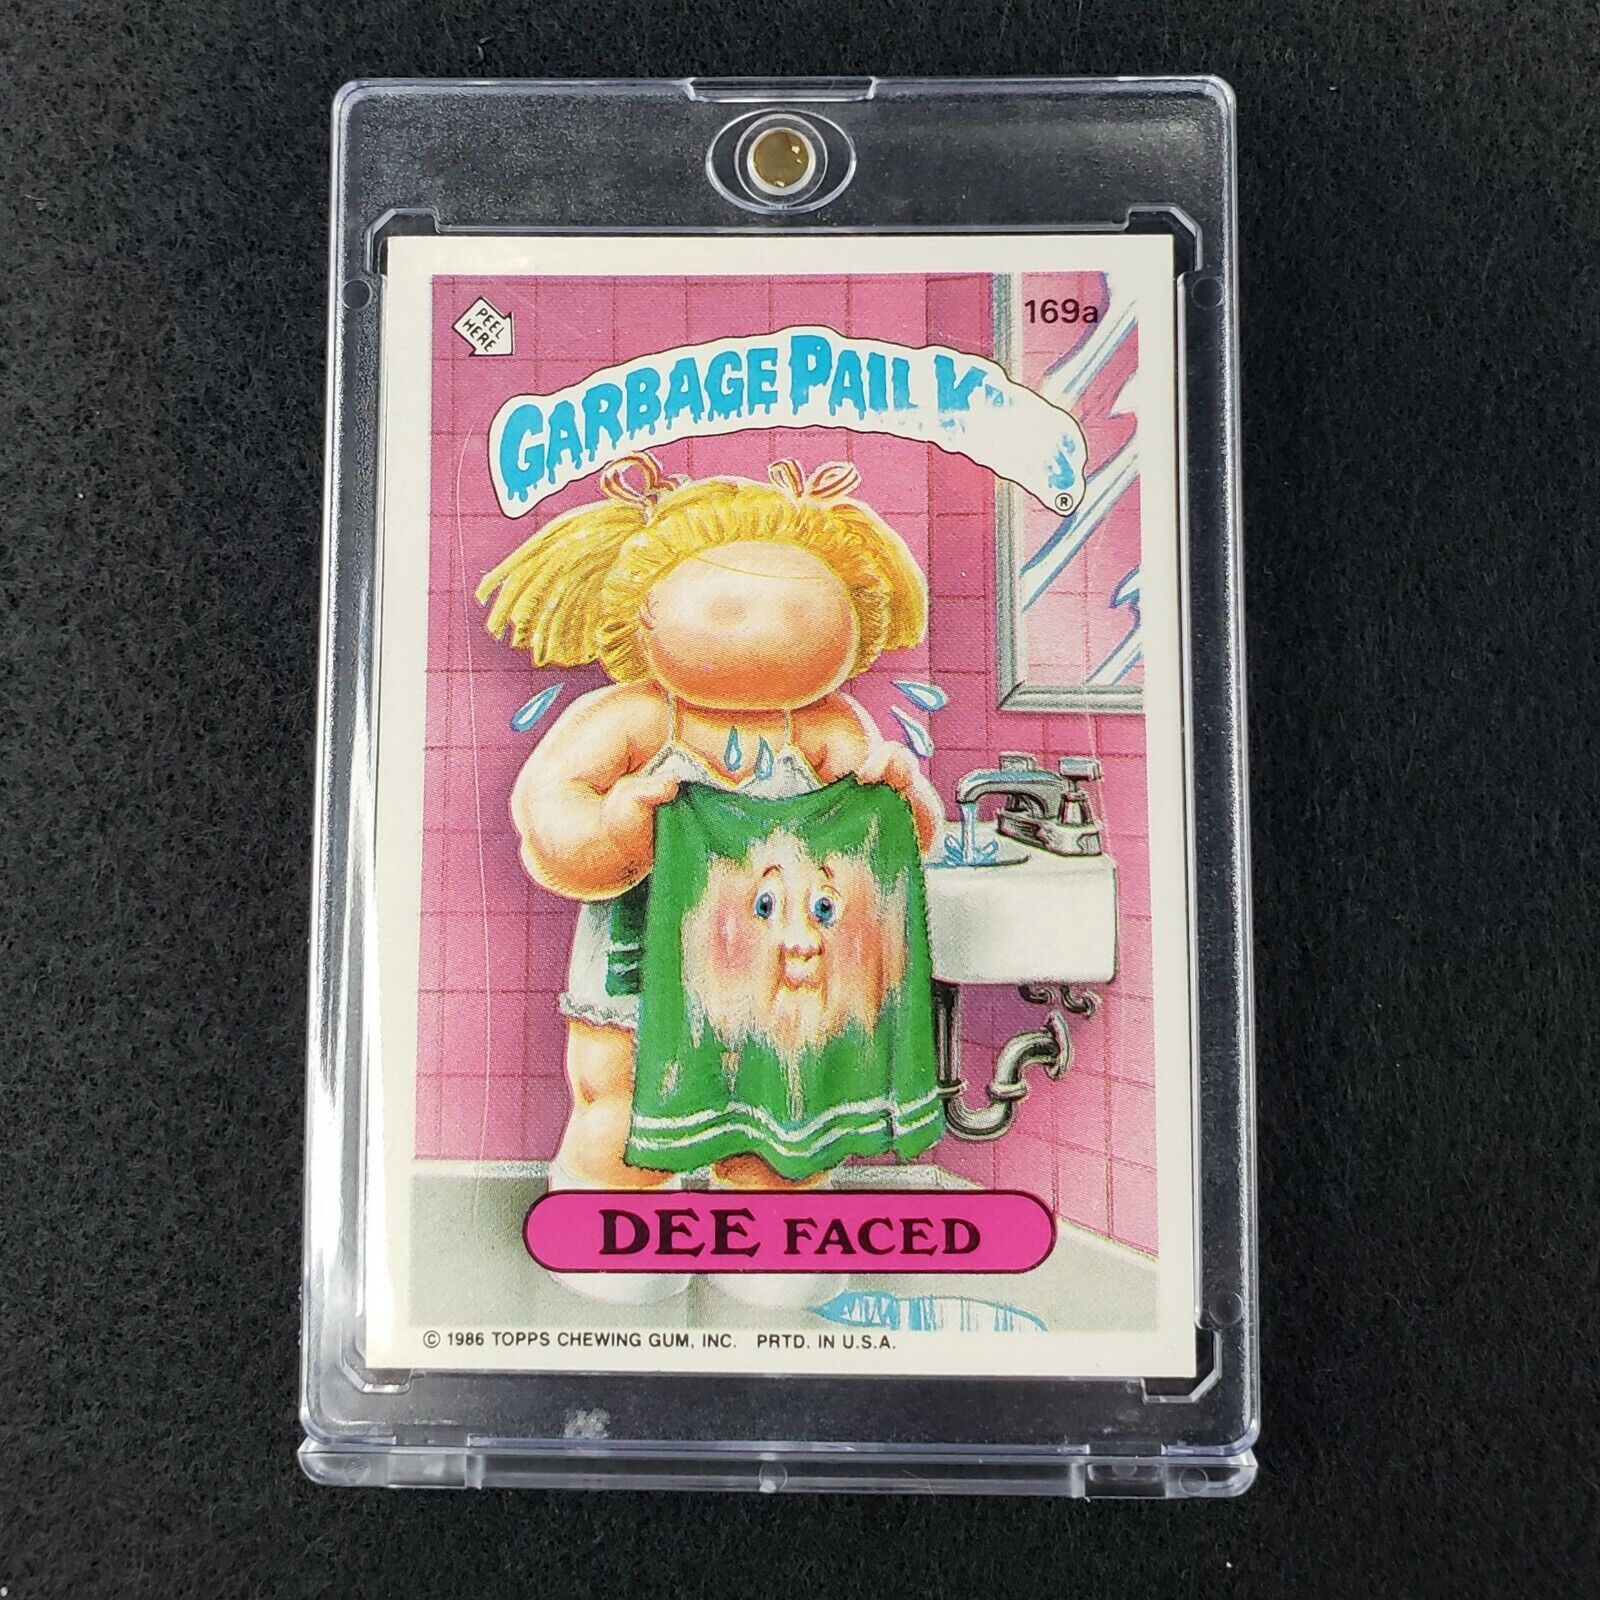 1986 Topps GPK OS5 Garbage Pail Kids 169a EXTREME RARE DEE FACED MISSING BANNER